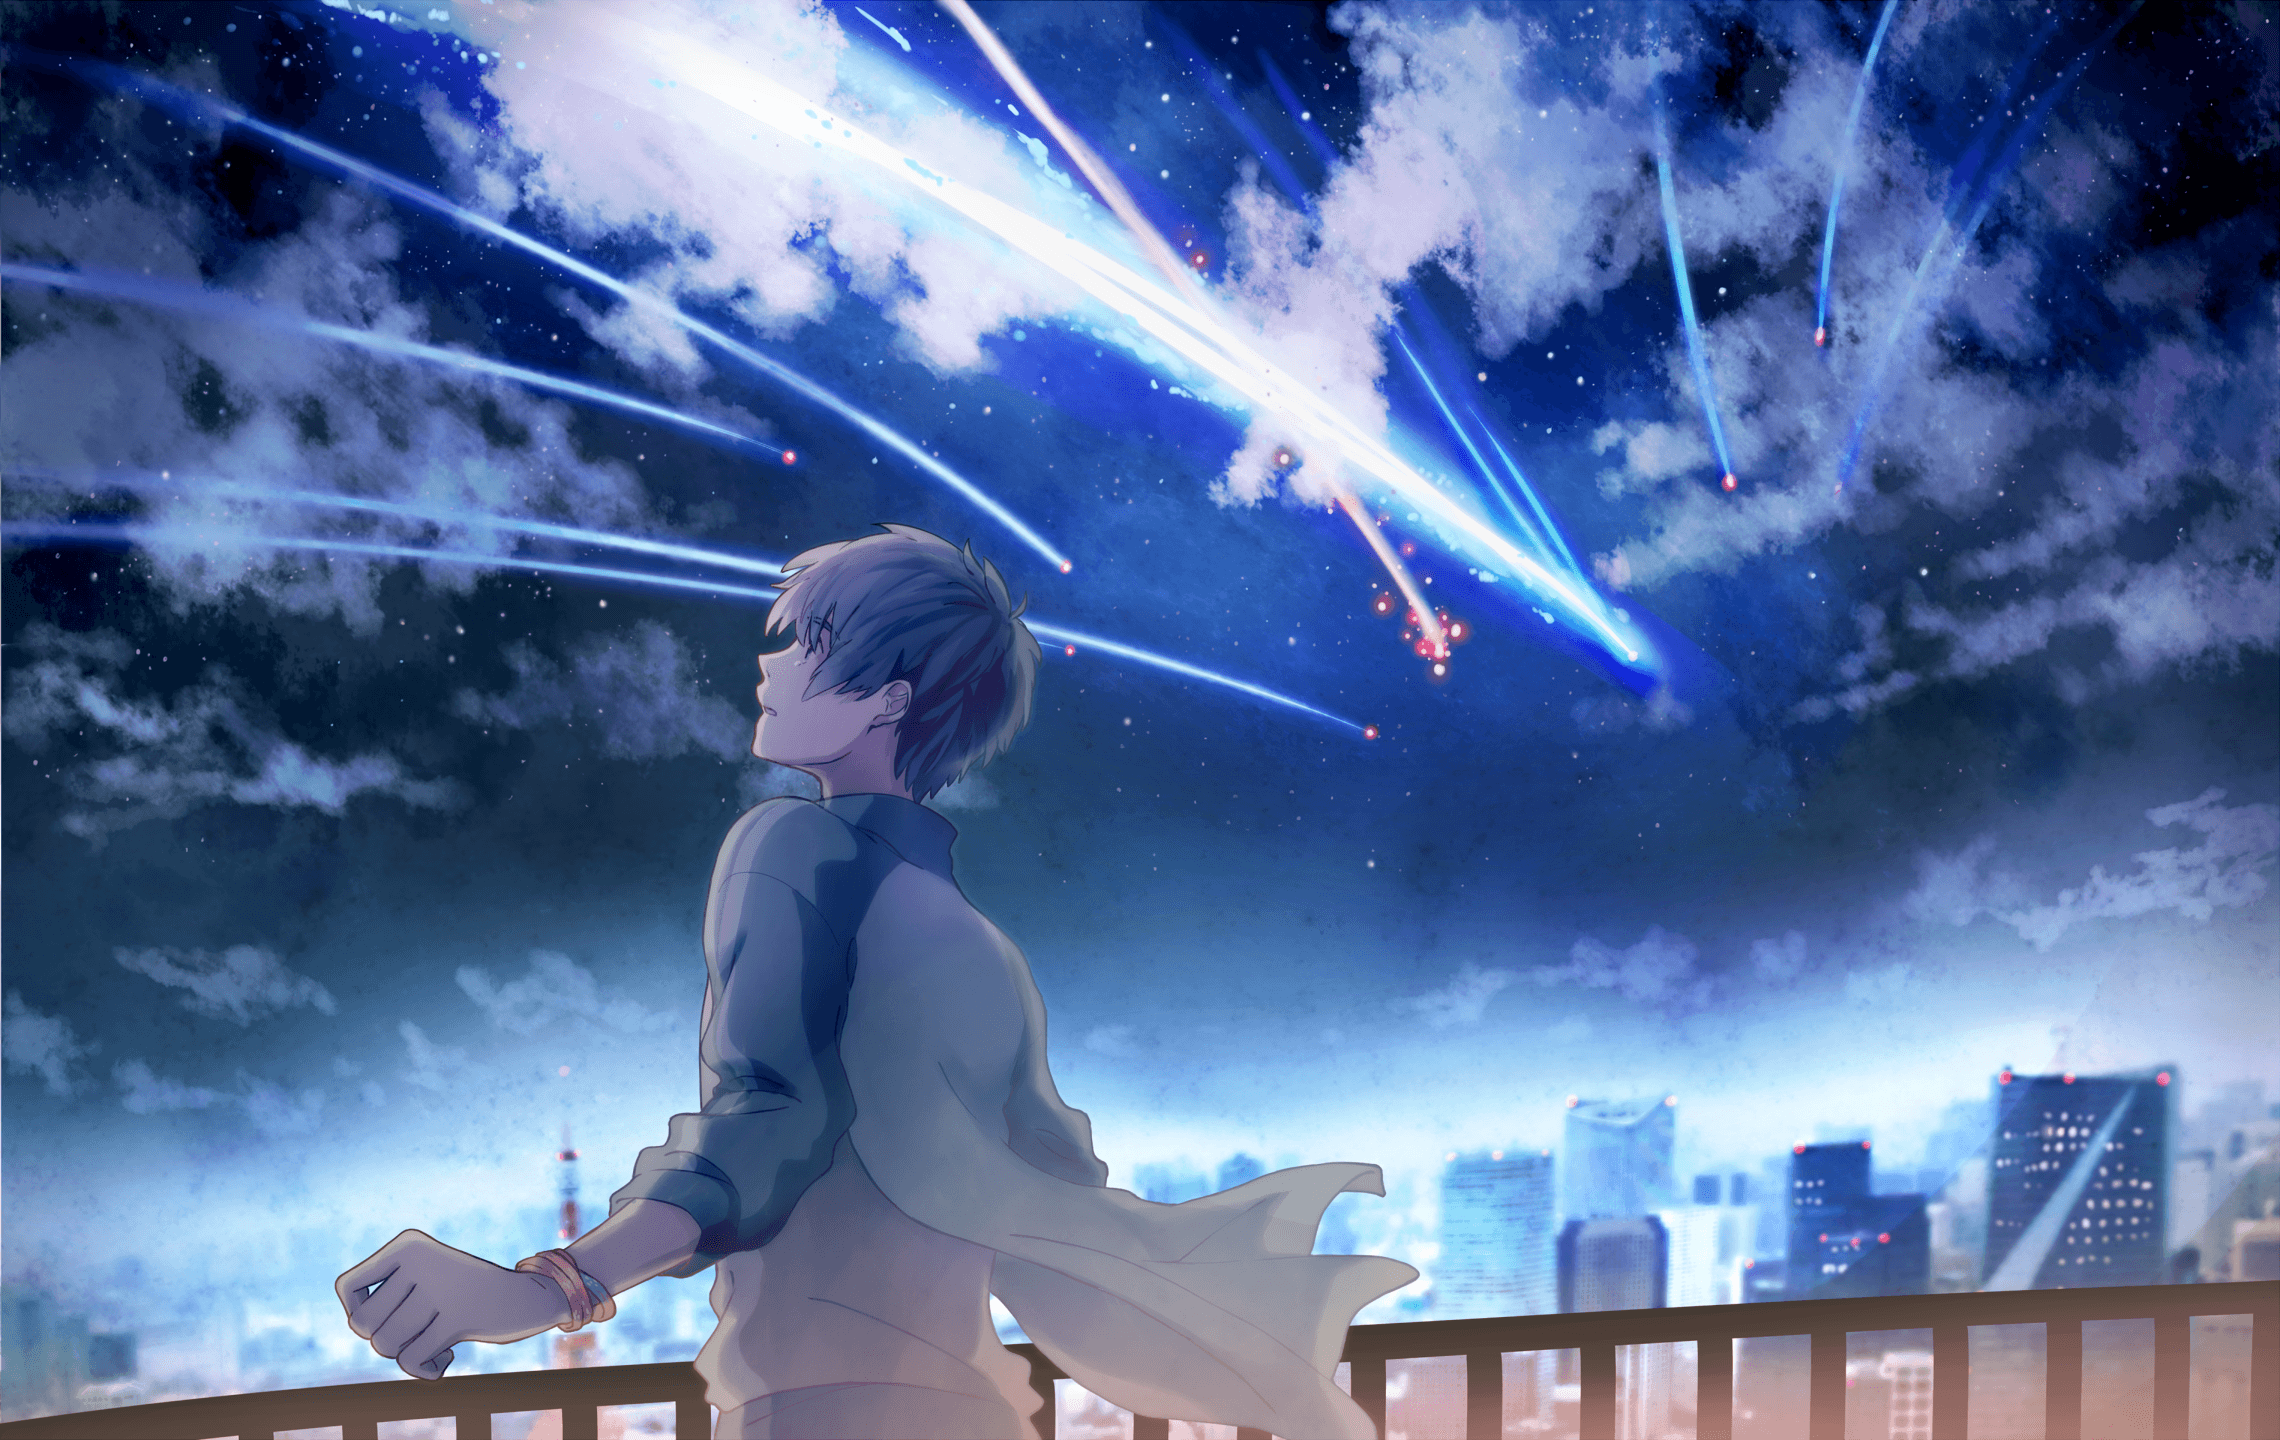 Your Name. HD Wallpaper